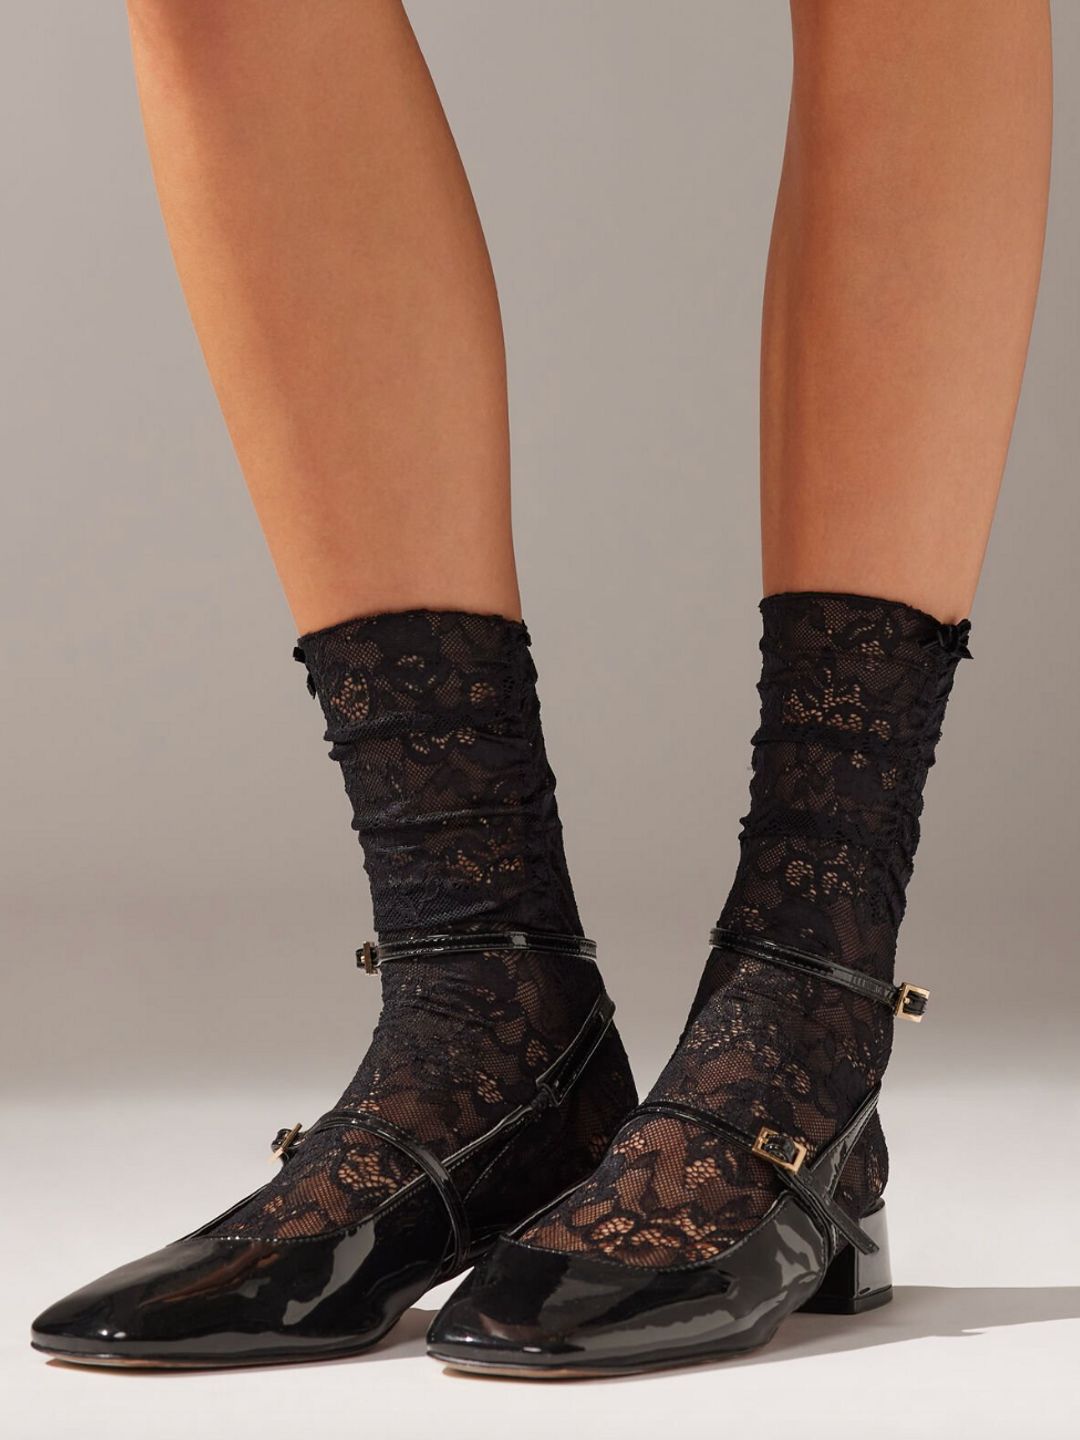 Lace Short Socks with Velvet Bow - Calzedonia